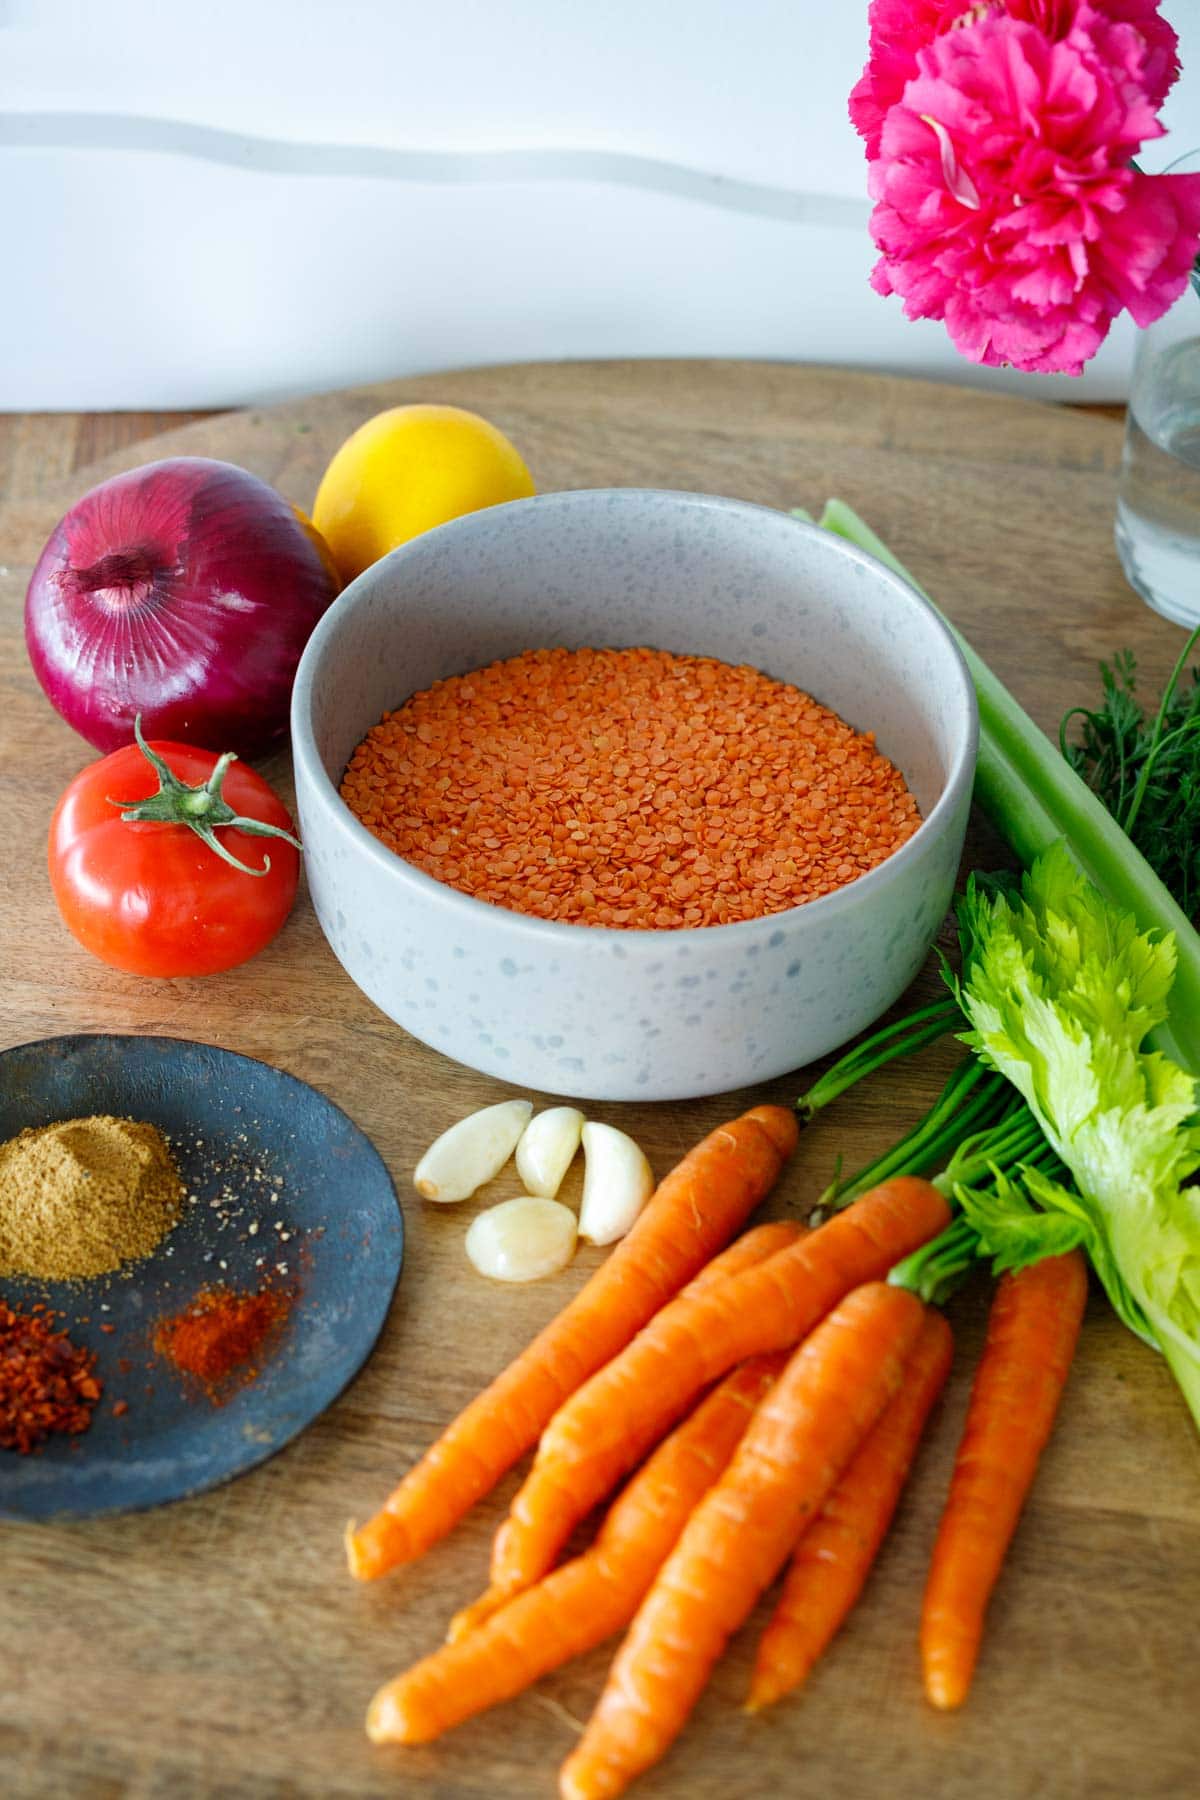 bowl of red lentils next to lemon, red onion, tomato, celery, carrots, garlic, and spices to make red lentil soup.